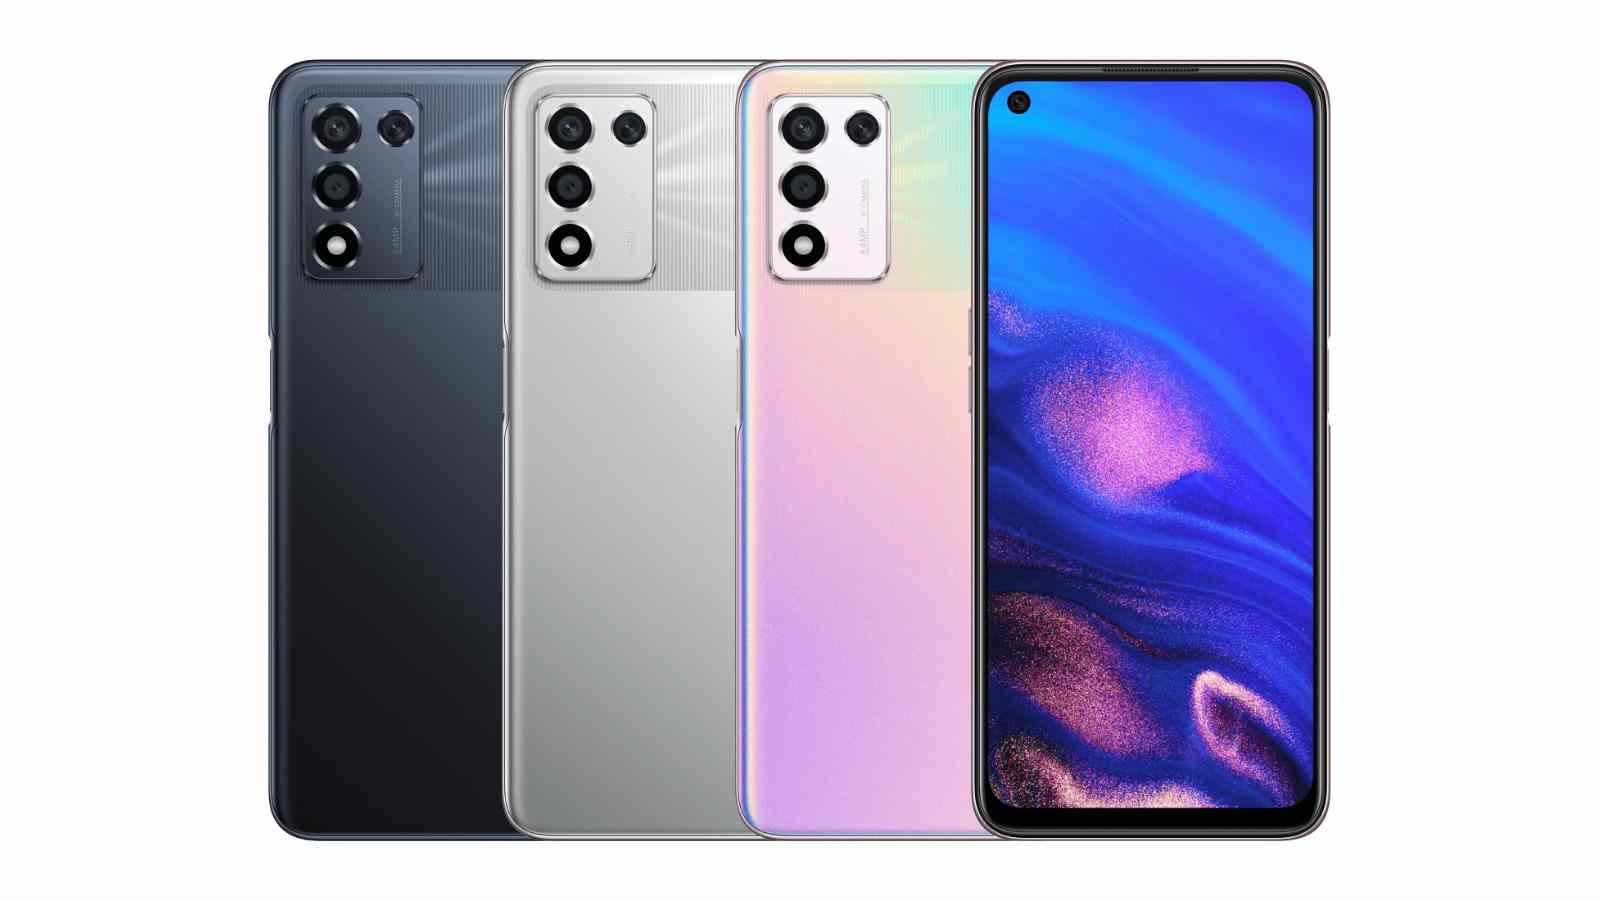 Oppo K9s with Snapdragon 778G, 120Hz LCD display launched: Price, Specifications